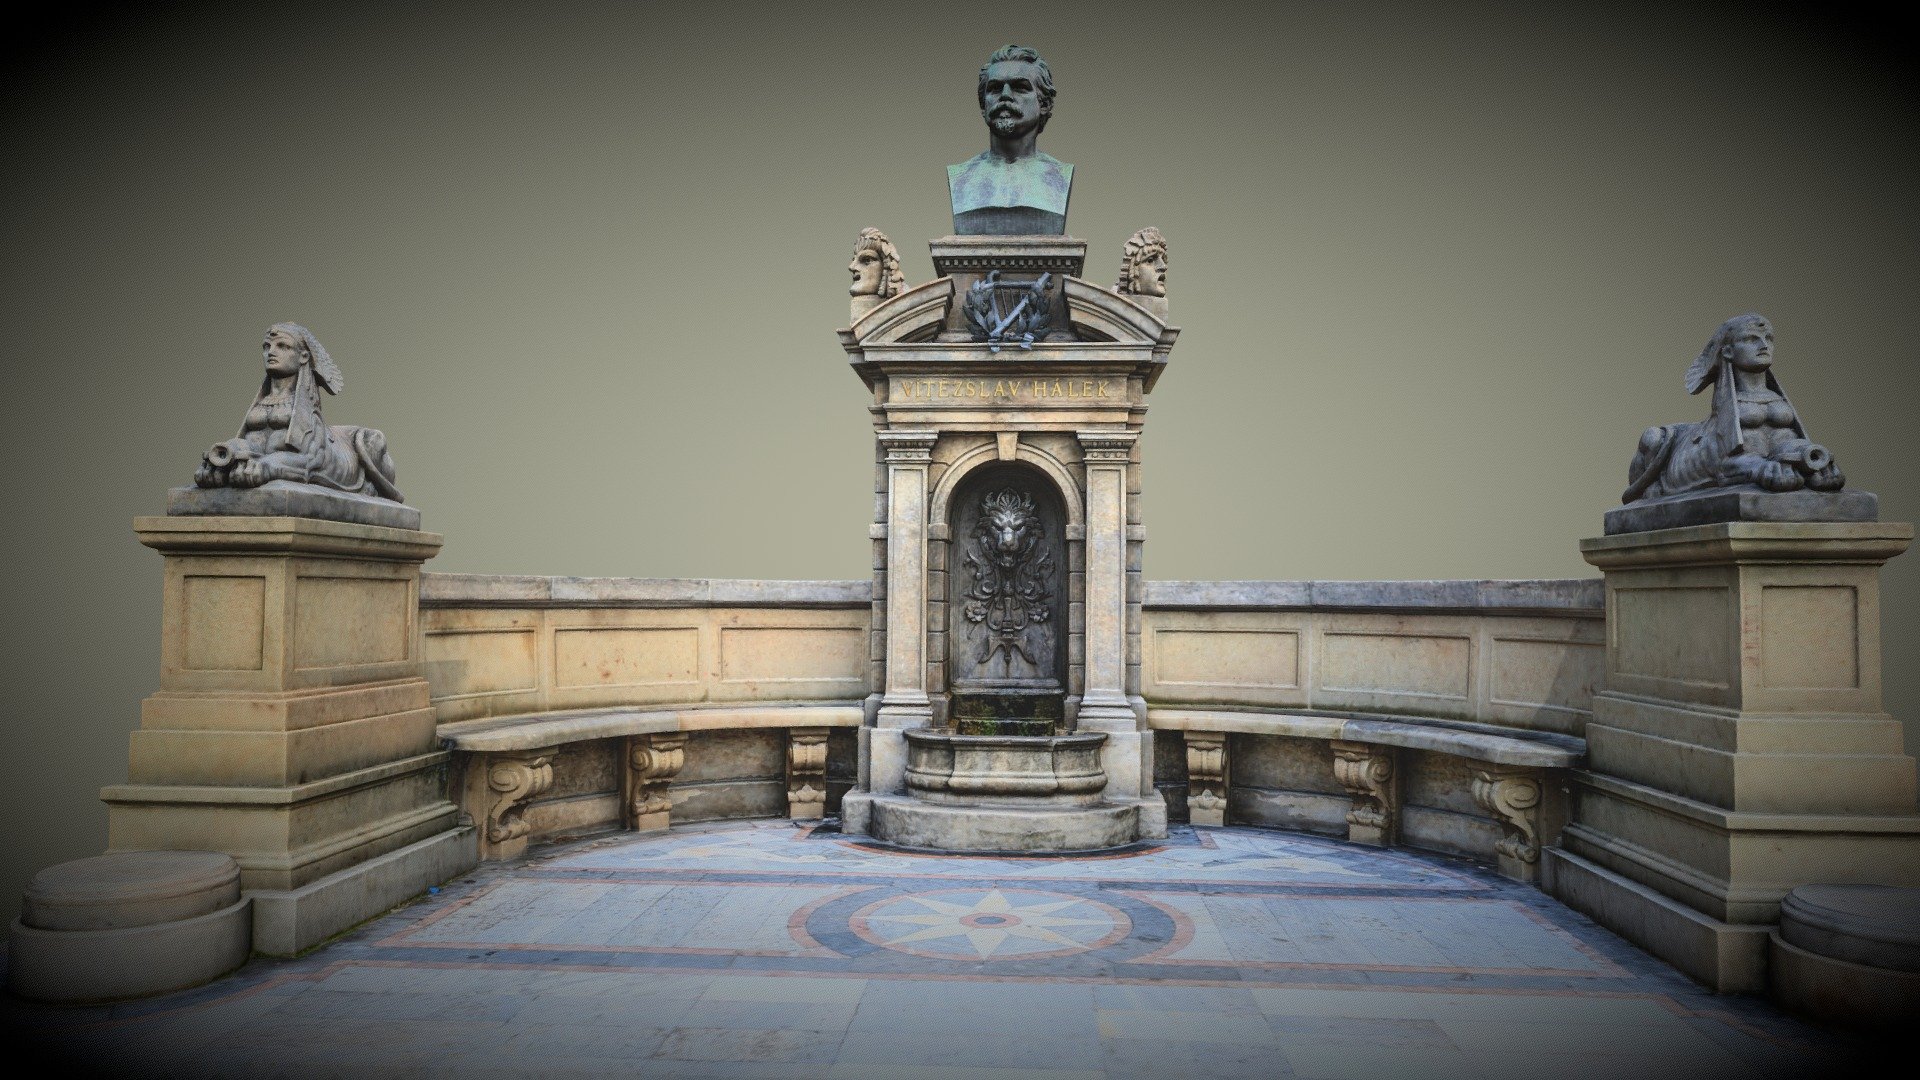 Vítězslav Hájek, is considered the founder of modern Czech poetry.

The ceremonial unveiling of the Hálek Memorial took place on 14 May 1882. The poet's bronze bust is placed above the fountain with a lion's head like a gargoyle. On the lyre below the bust there is a laurel wreath, on the sides are allegories of Comedy and Tragedy . The sides are decorated with a fountain decorated with sphinxes.
The sculptor Bohuslav Schnirch (1845–1901).
Photogrammetry scan 3d model